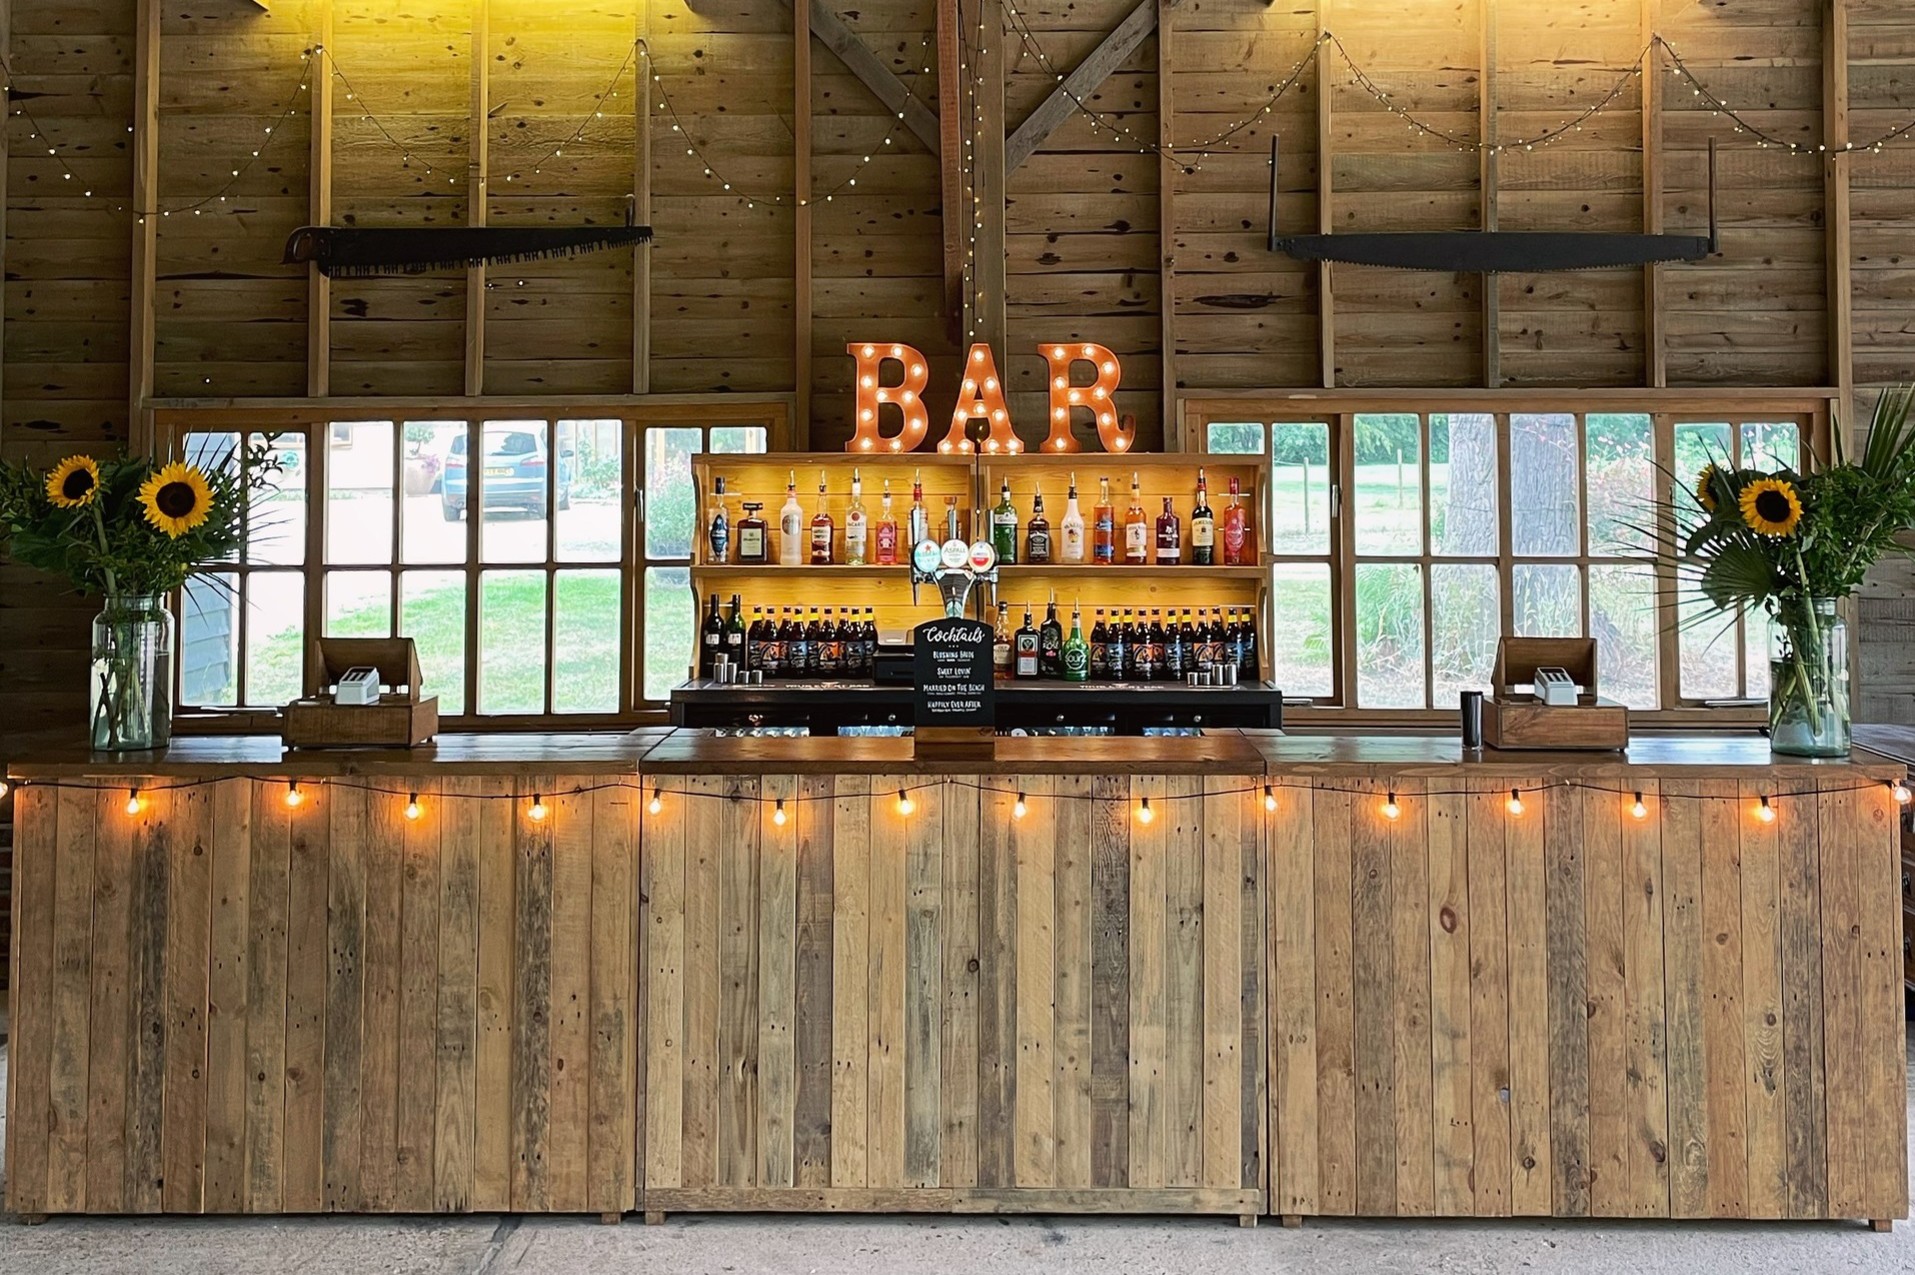 Wooden bar units made from reclaimed pallets with festoon lighting